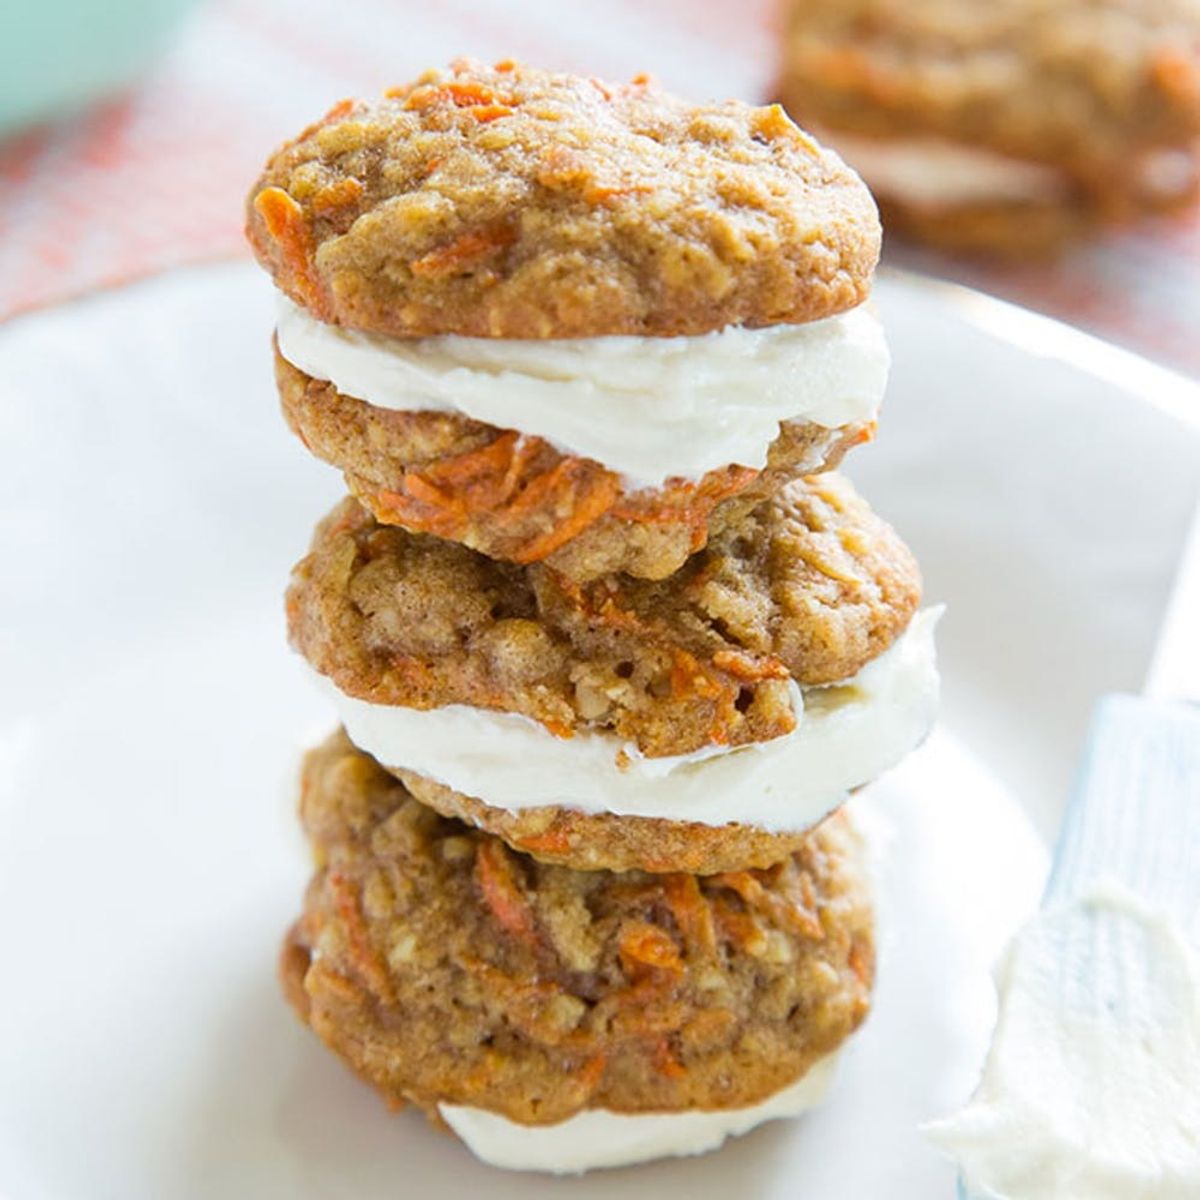 Mini Carrot Cake Cookie Sandwiches With Cream Cheese Frosting